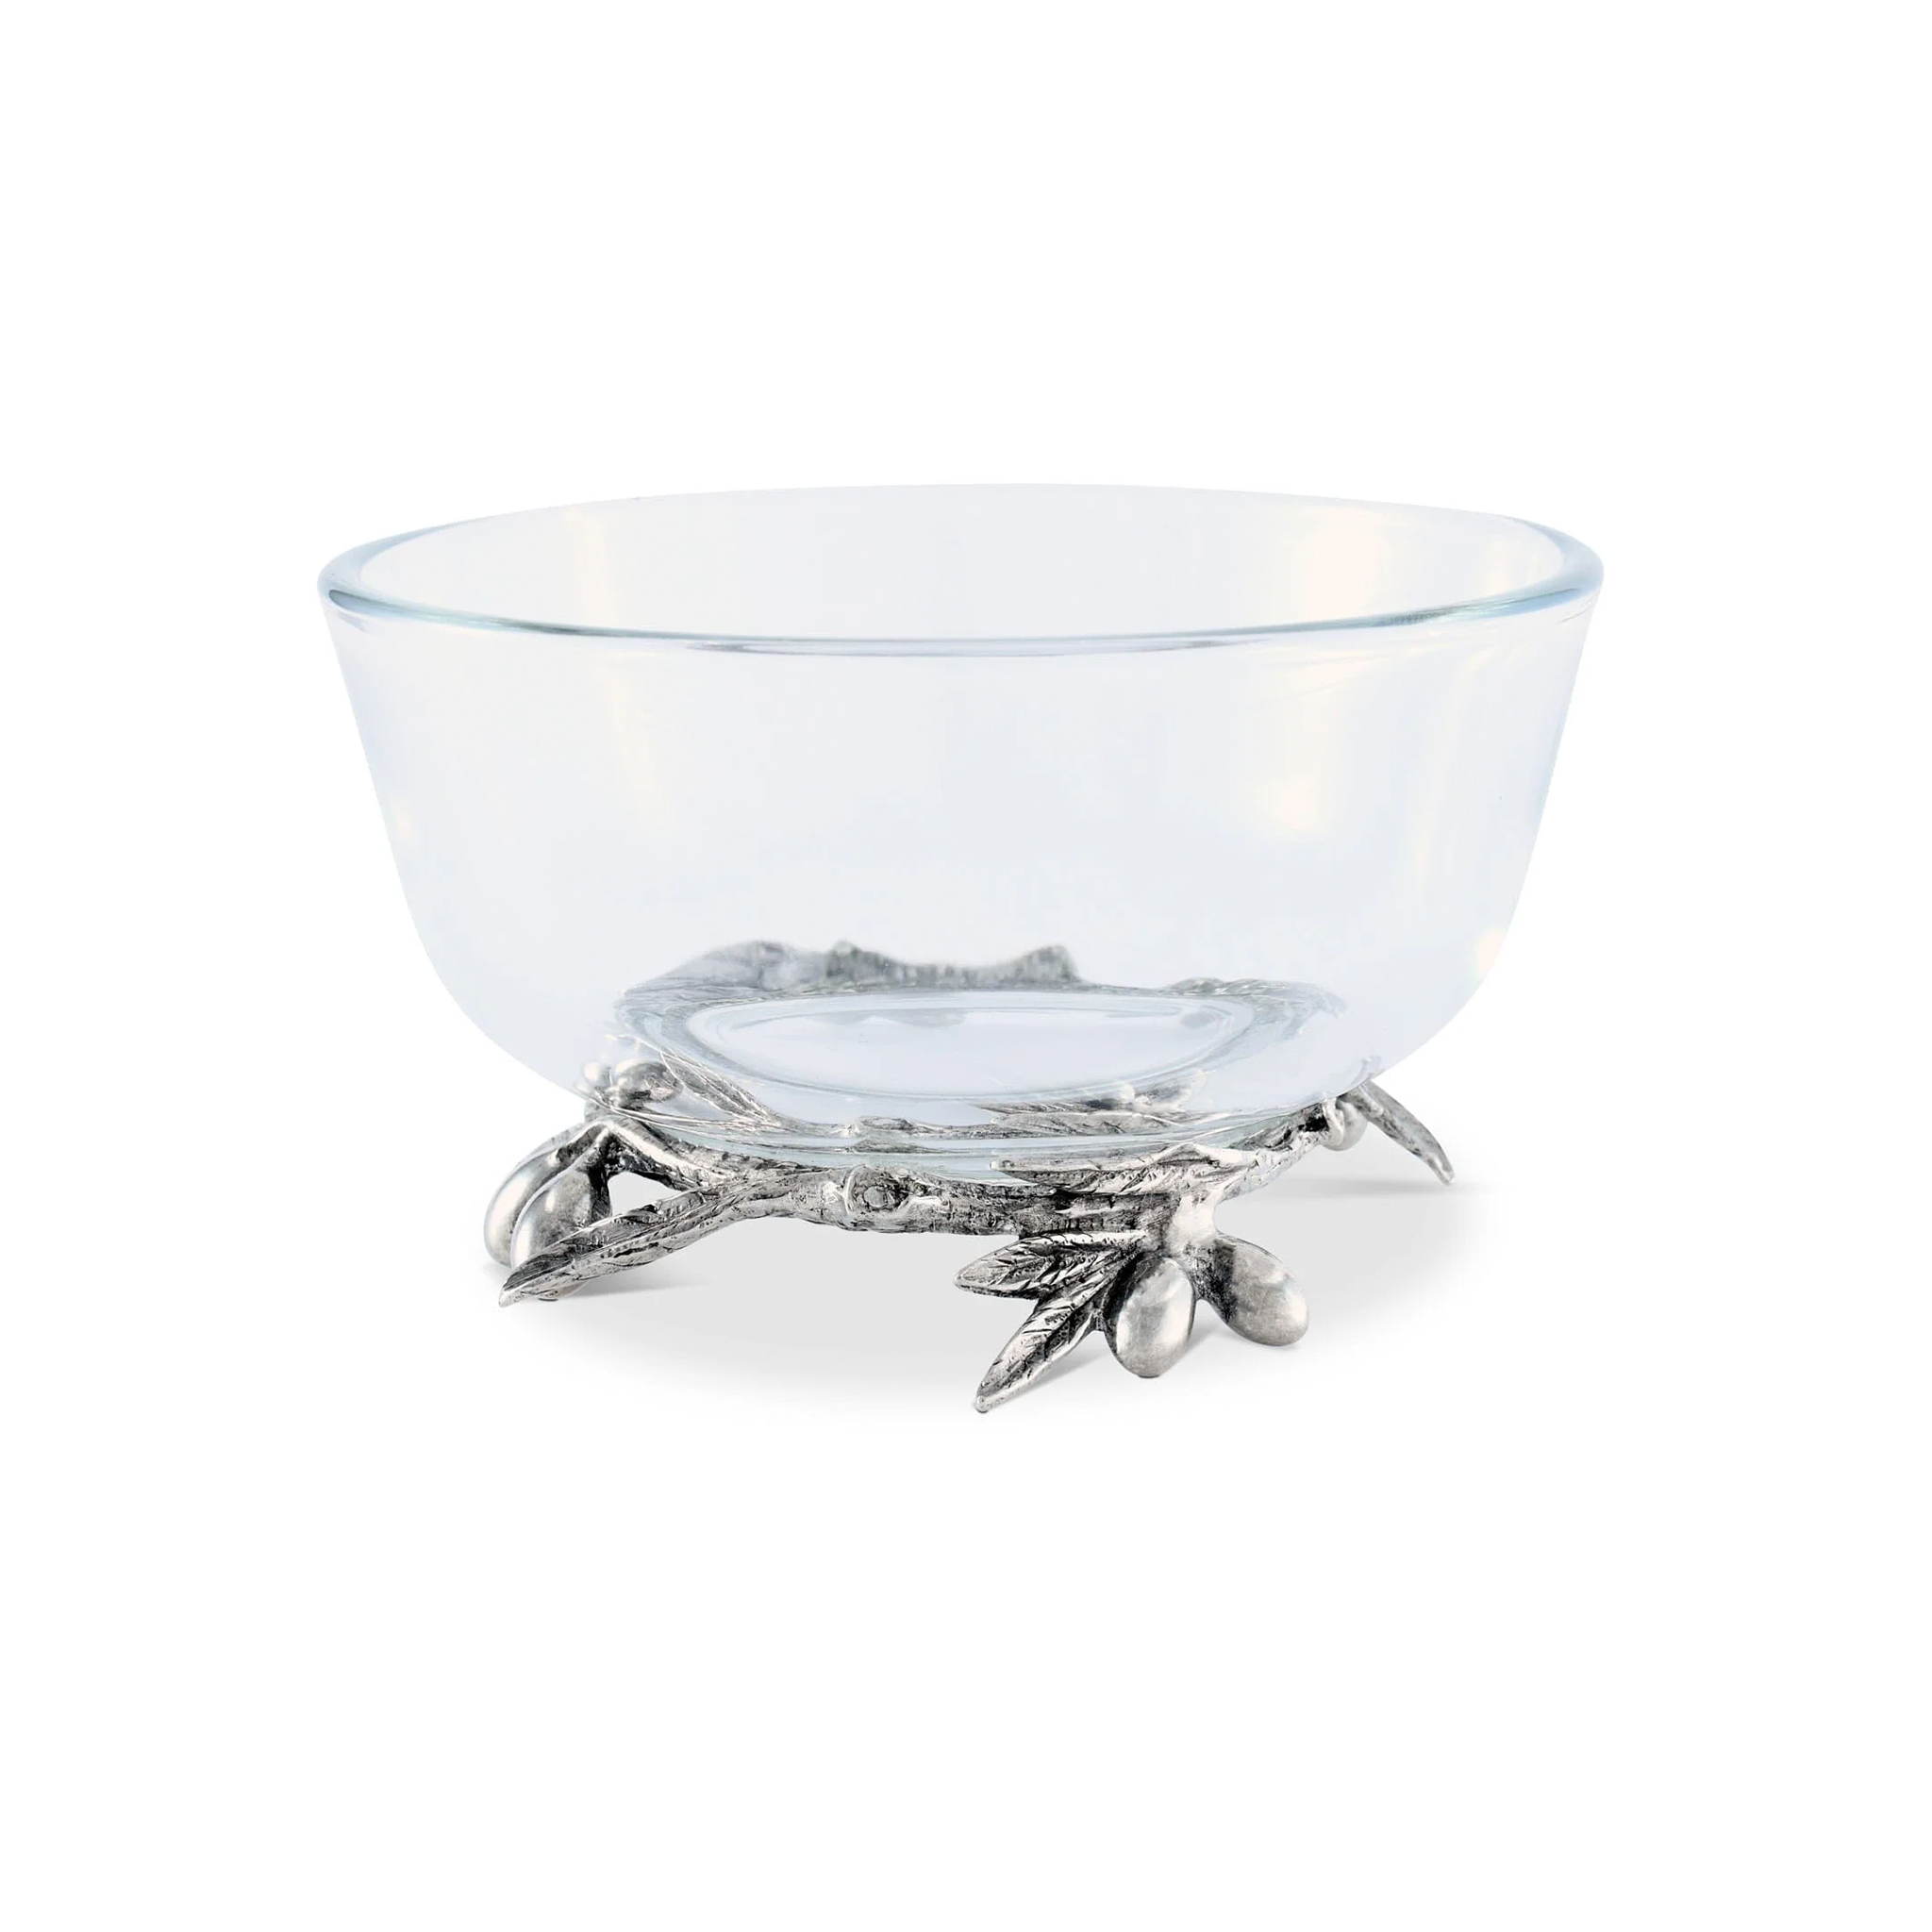 a glass bowl with pewter olives and leaves on it